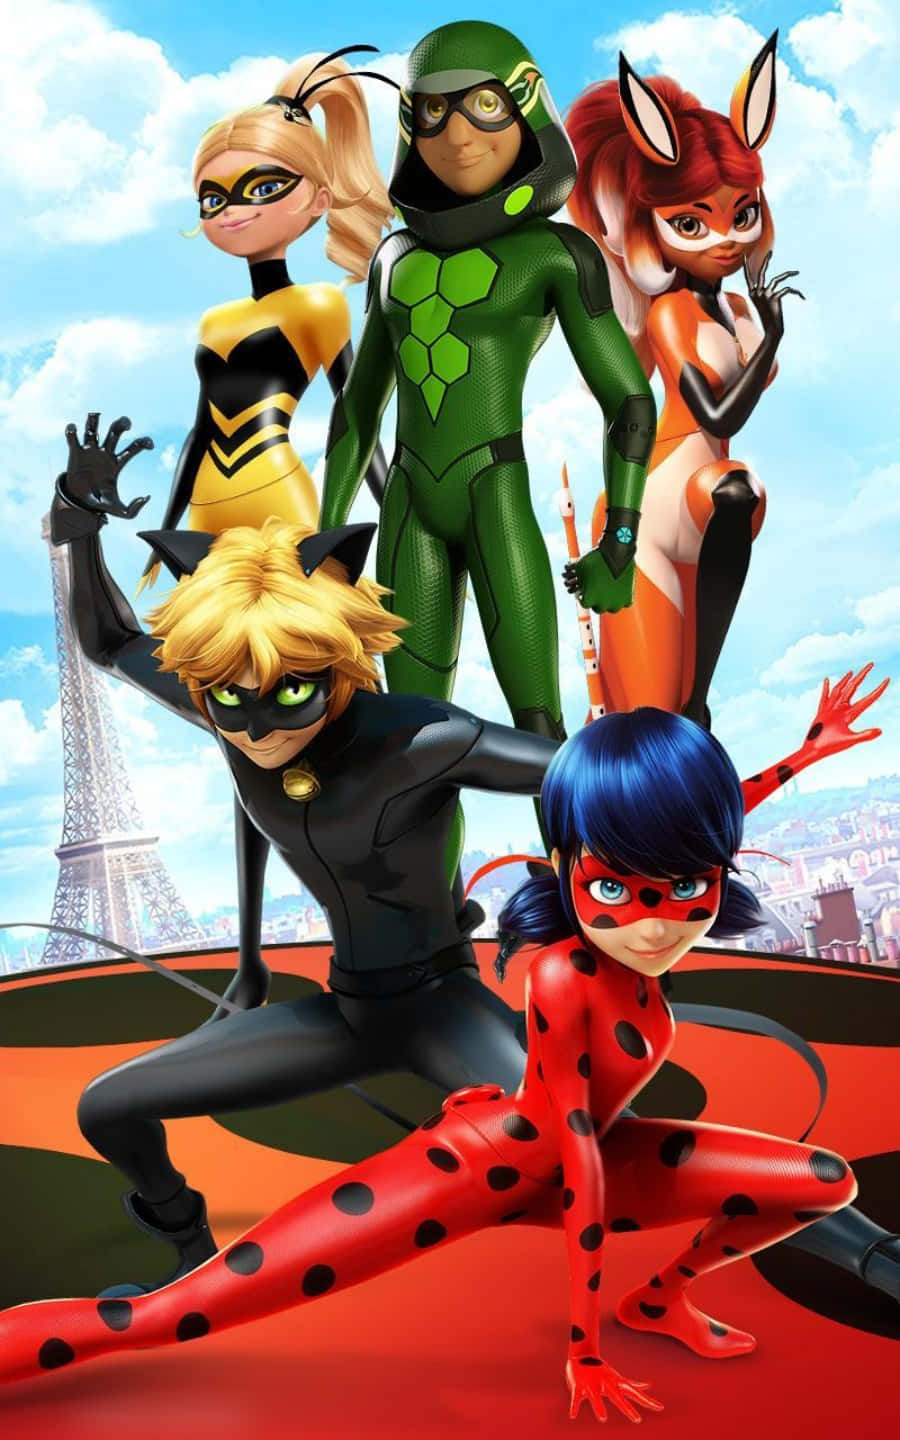 Ladybug and Chat Noir, heroes of Paris